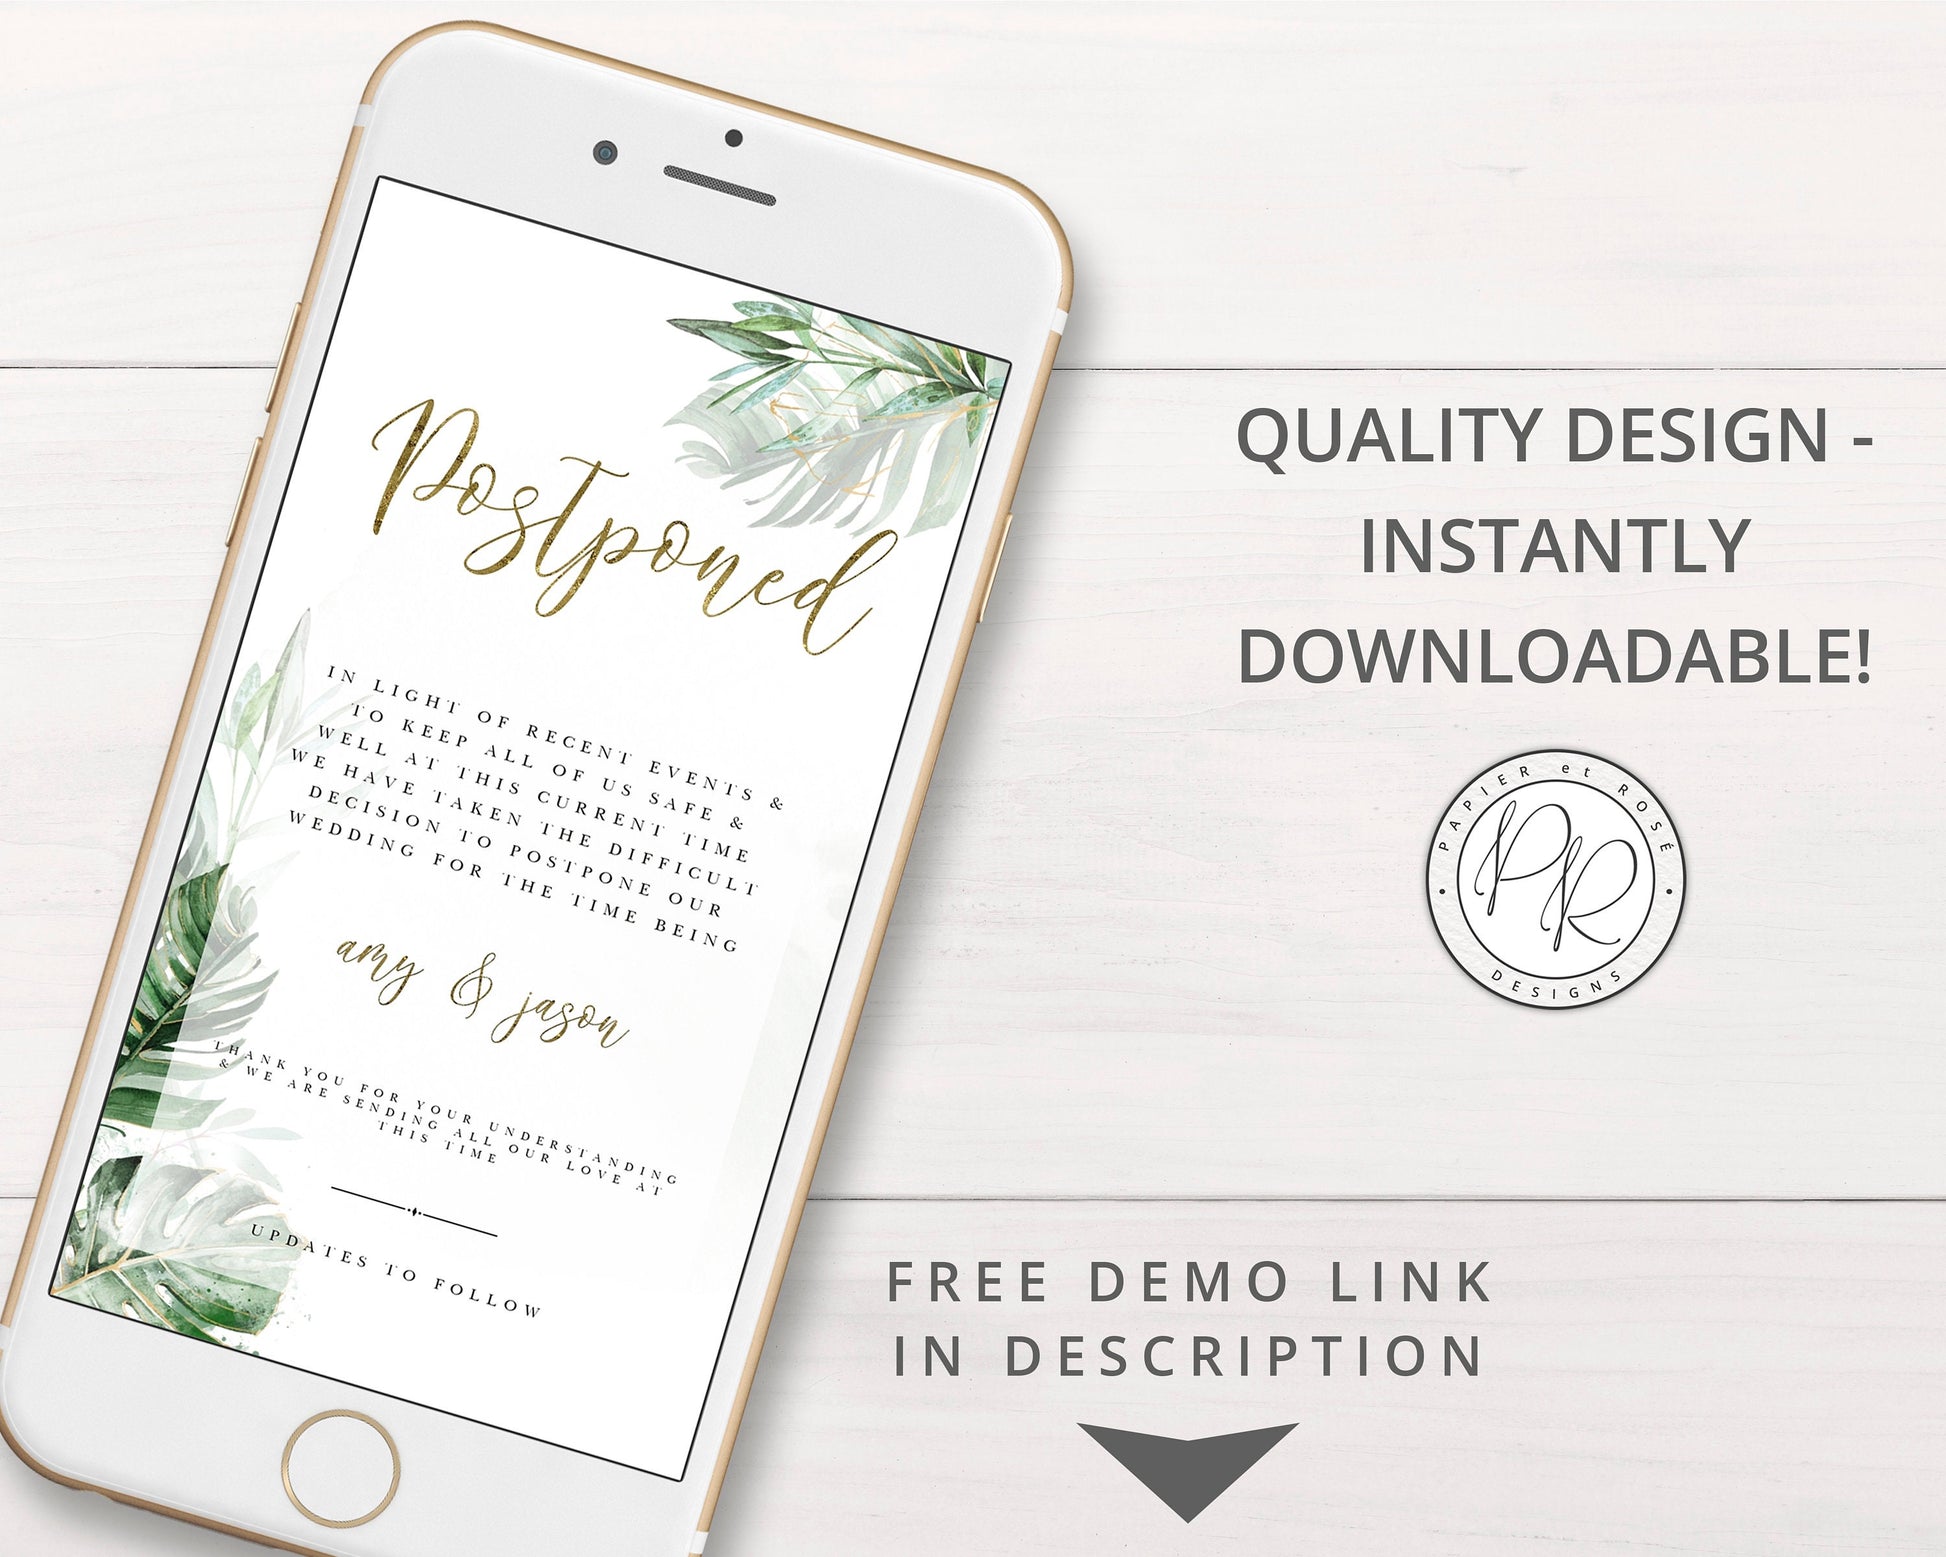 DIY Instant New Date Foliage Digital Phone E-message Change of Plans Change Wedding Date | Postponed Announcement Editable Template - PRD007